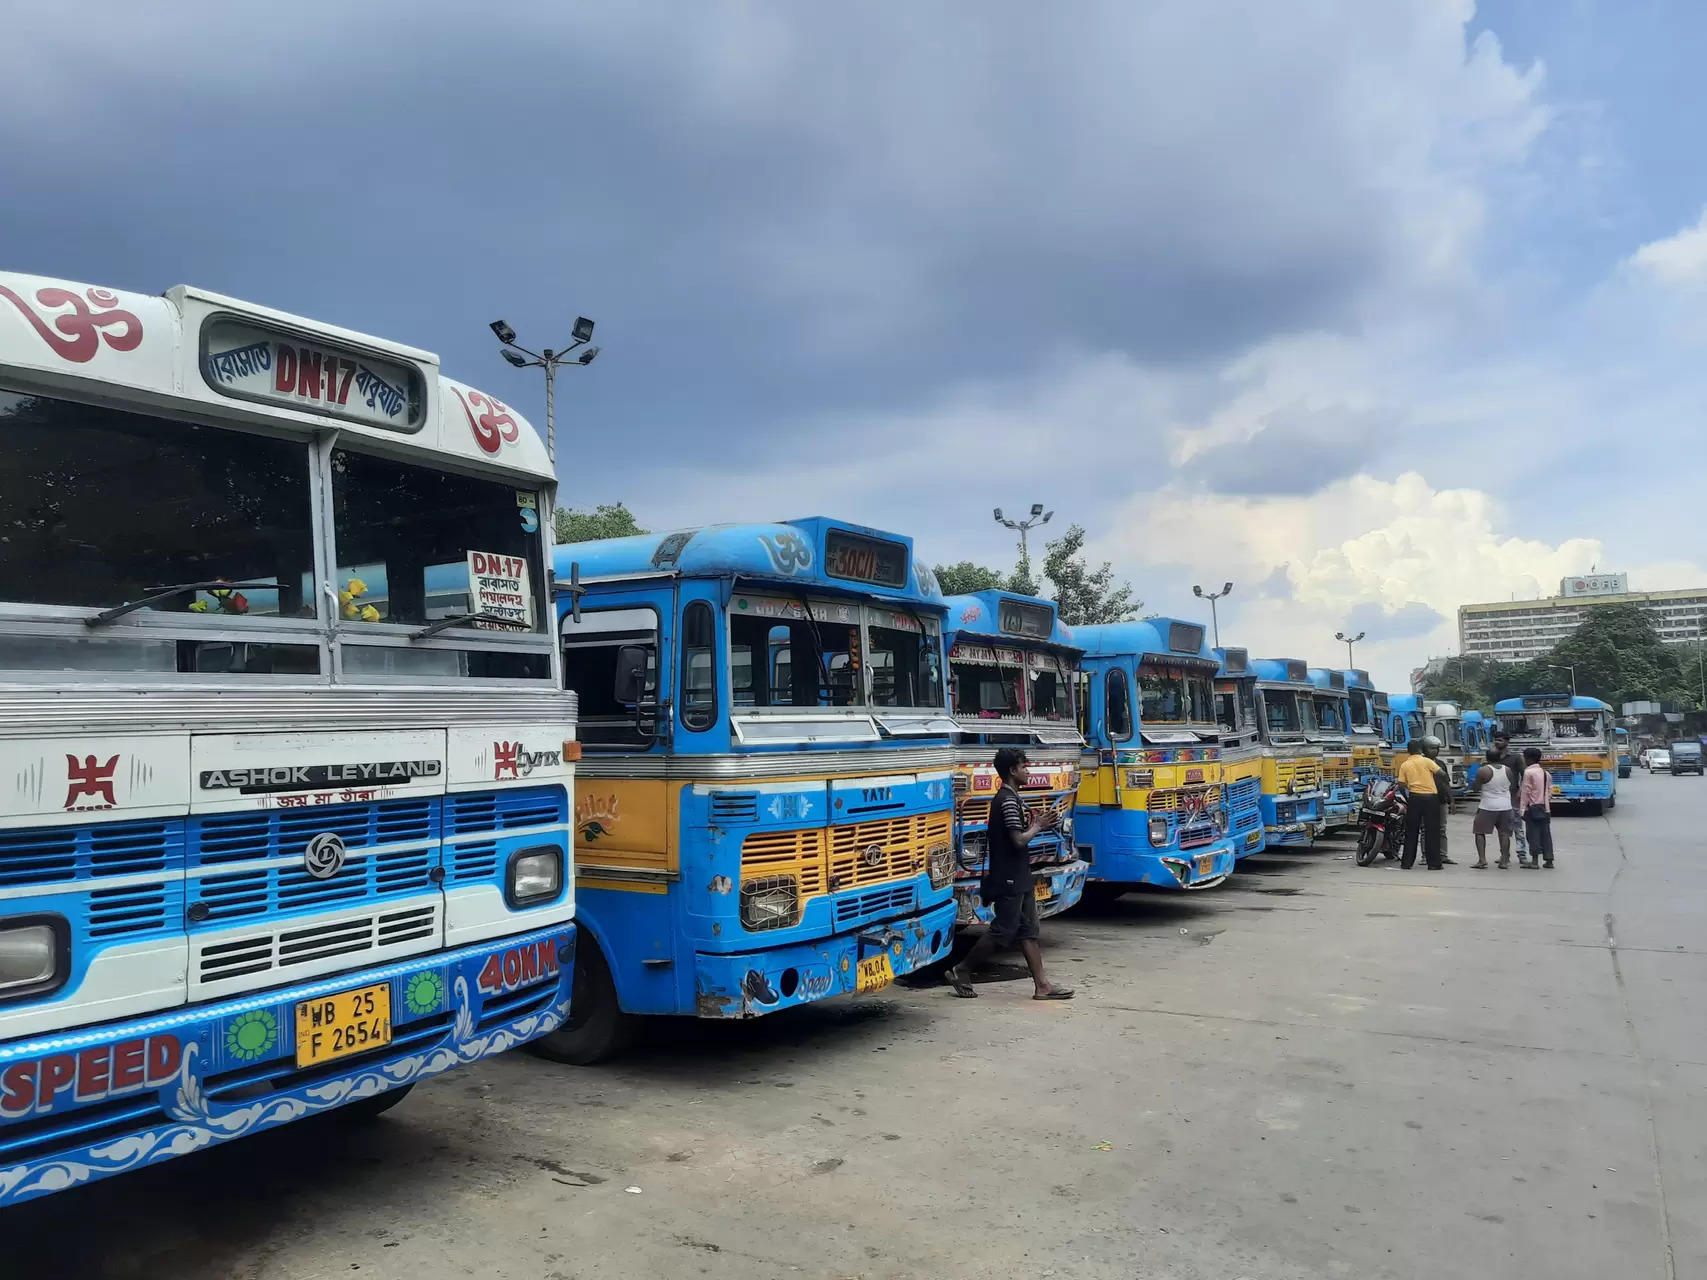 With 50% of pvt bus fleet set to be scrapped, Kolkata faces commute crisis